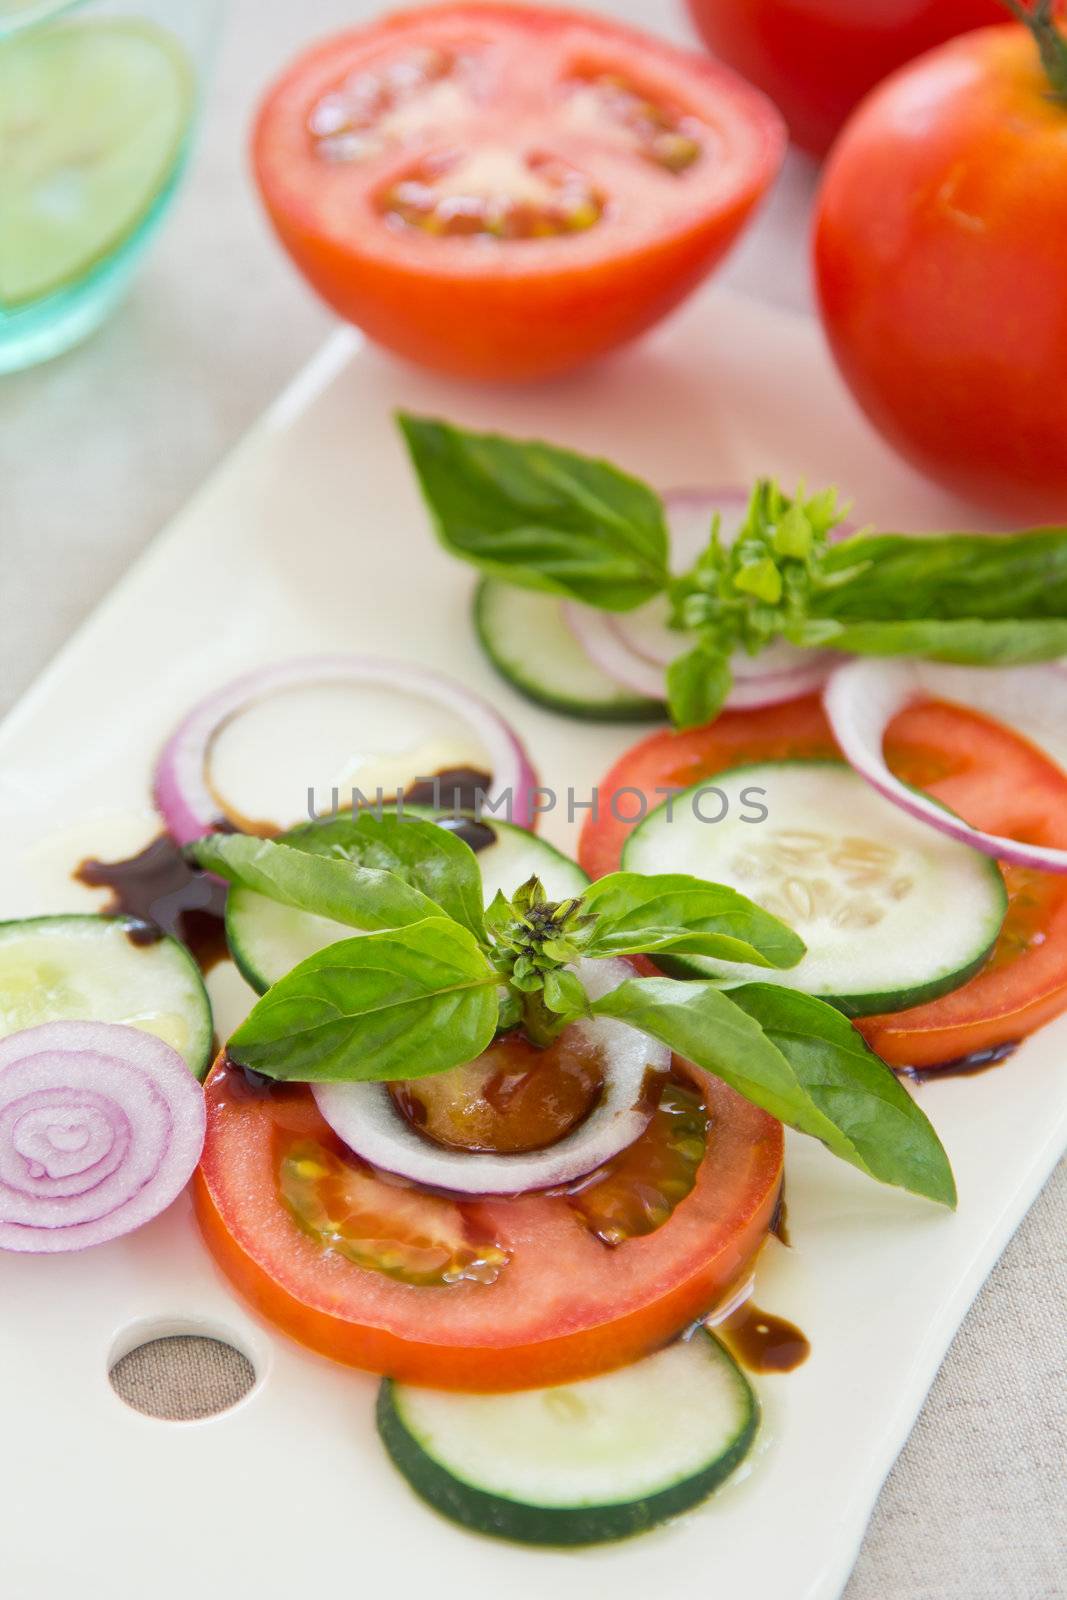 Tomato,cucumber and basil salad with balsamic sauce